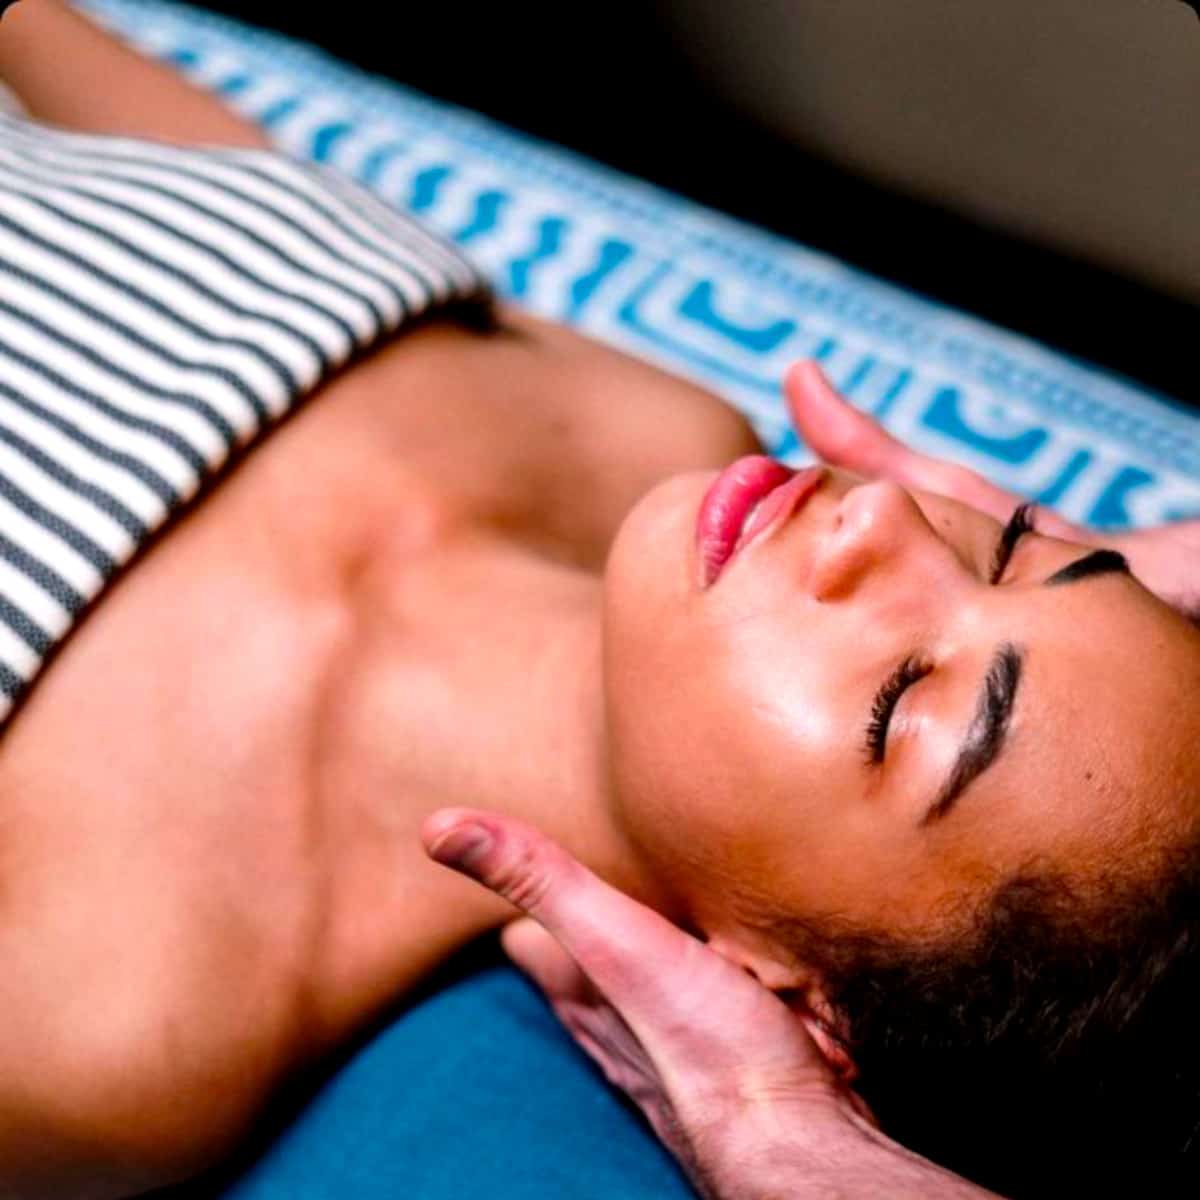 a woman practicing self-care by receiving a massage